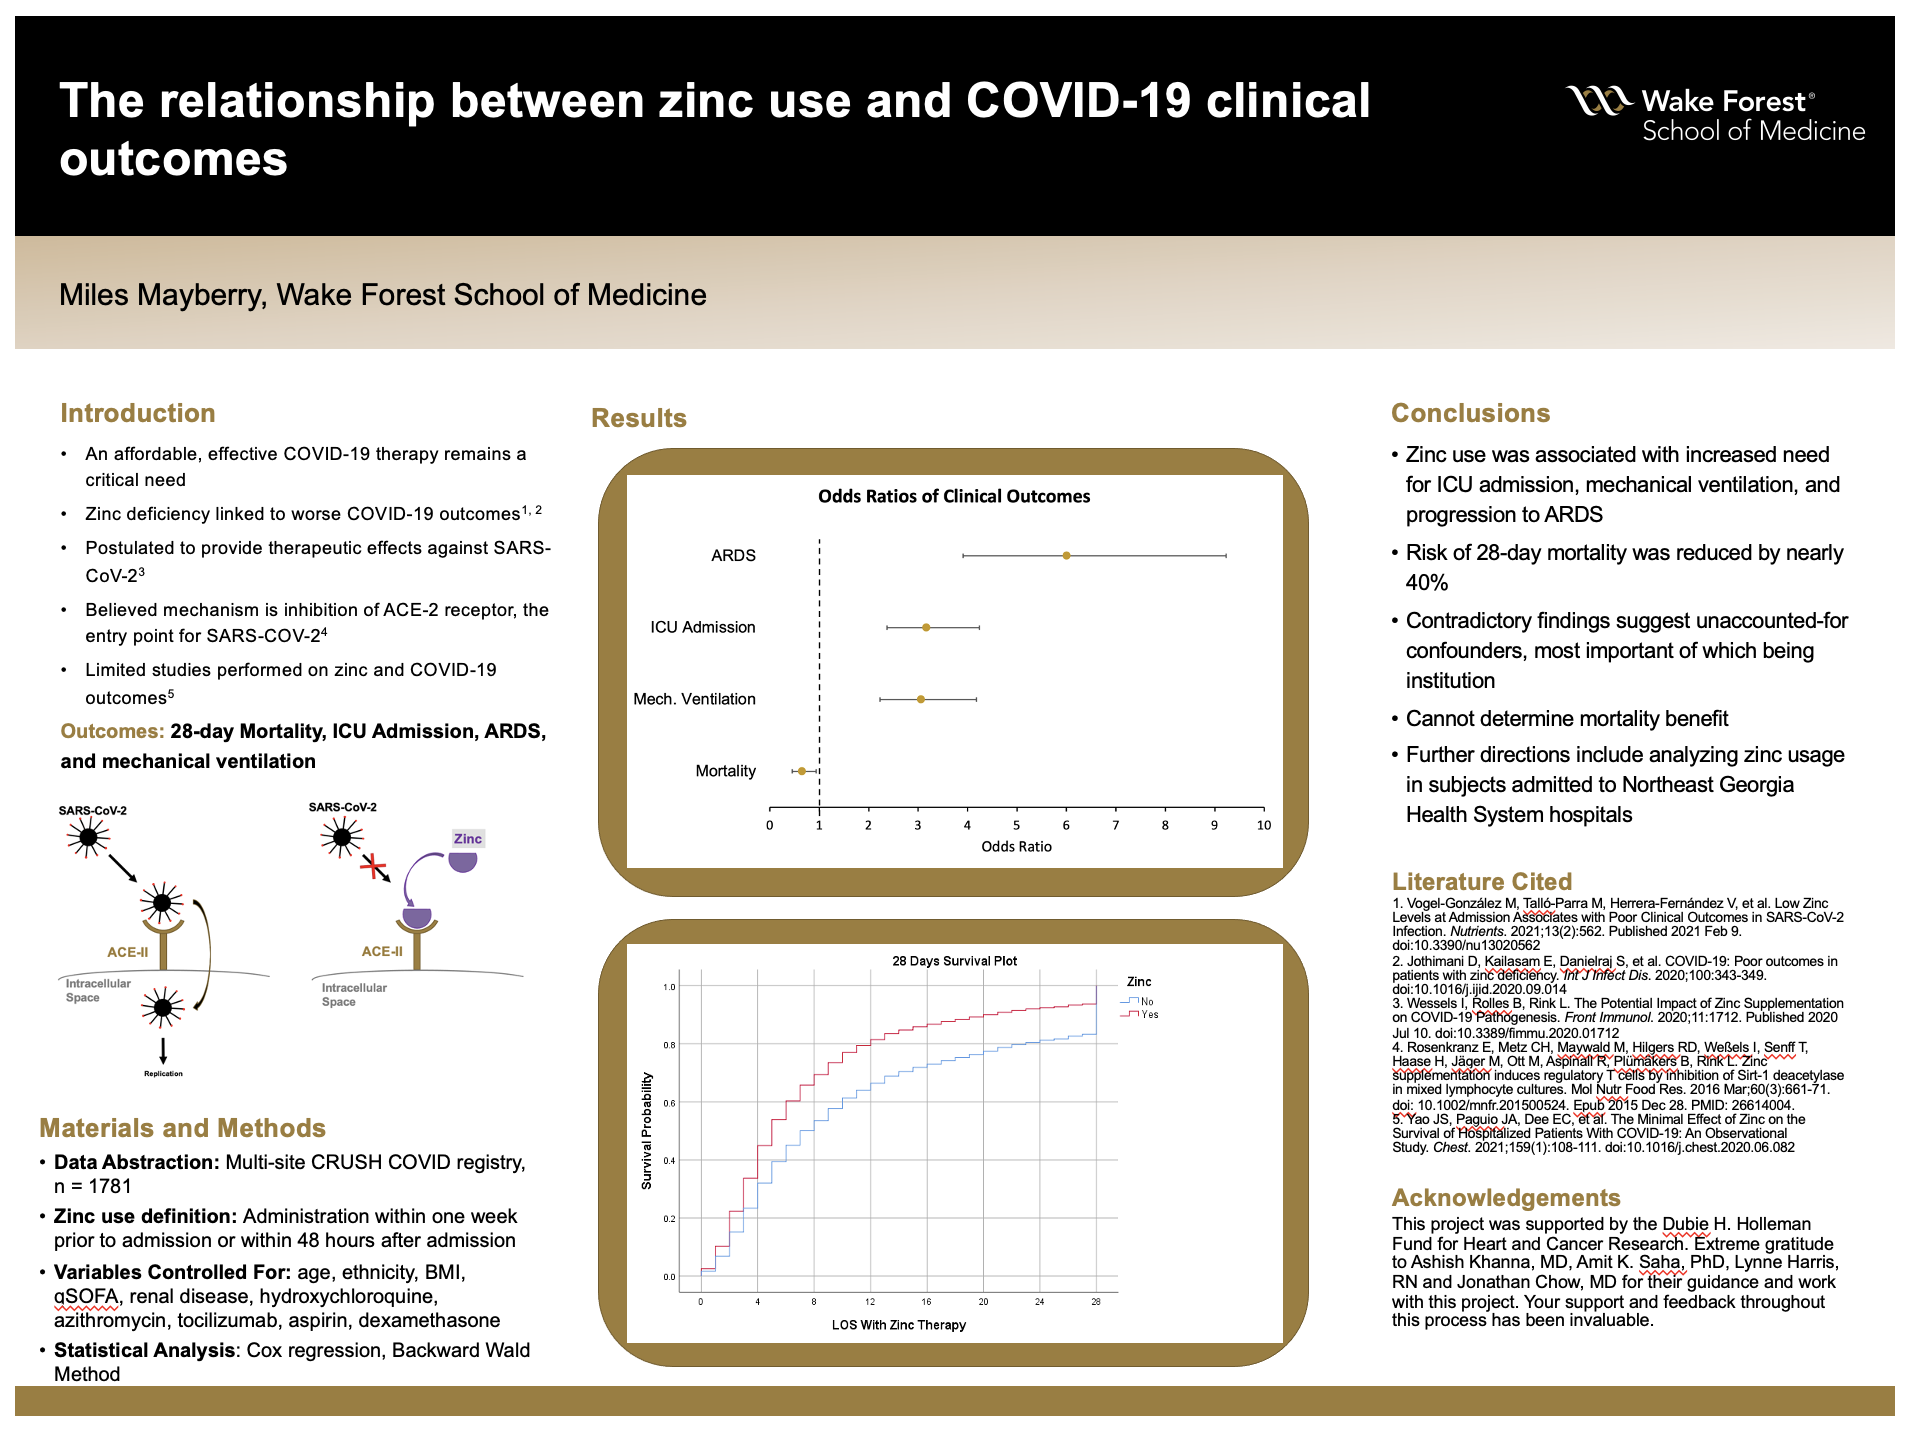 Showcase Image for The relationship between zinc use and COVID-19 clinical outcomes